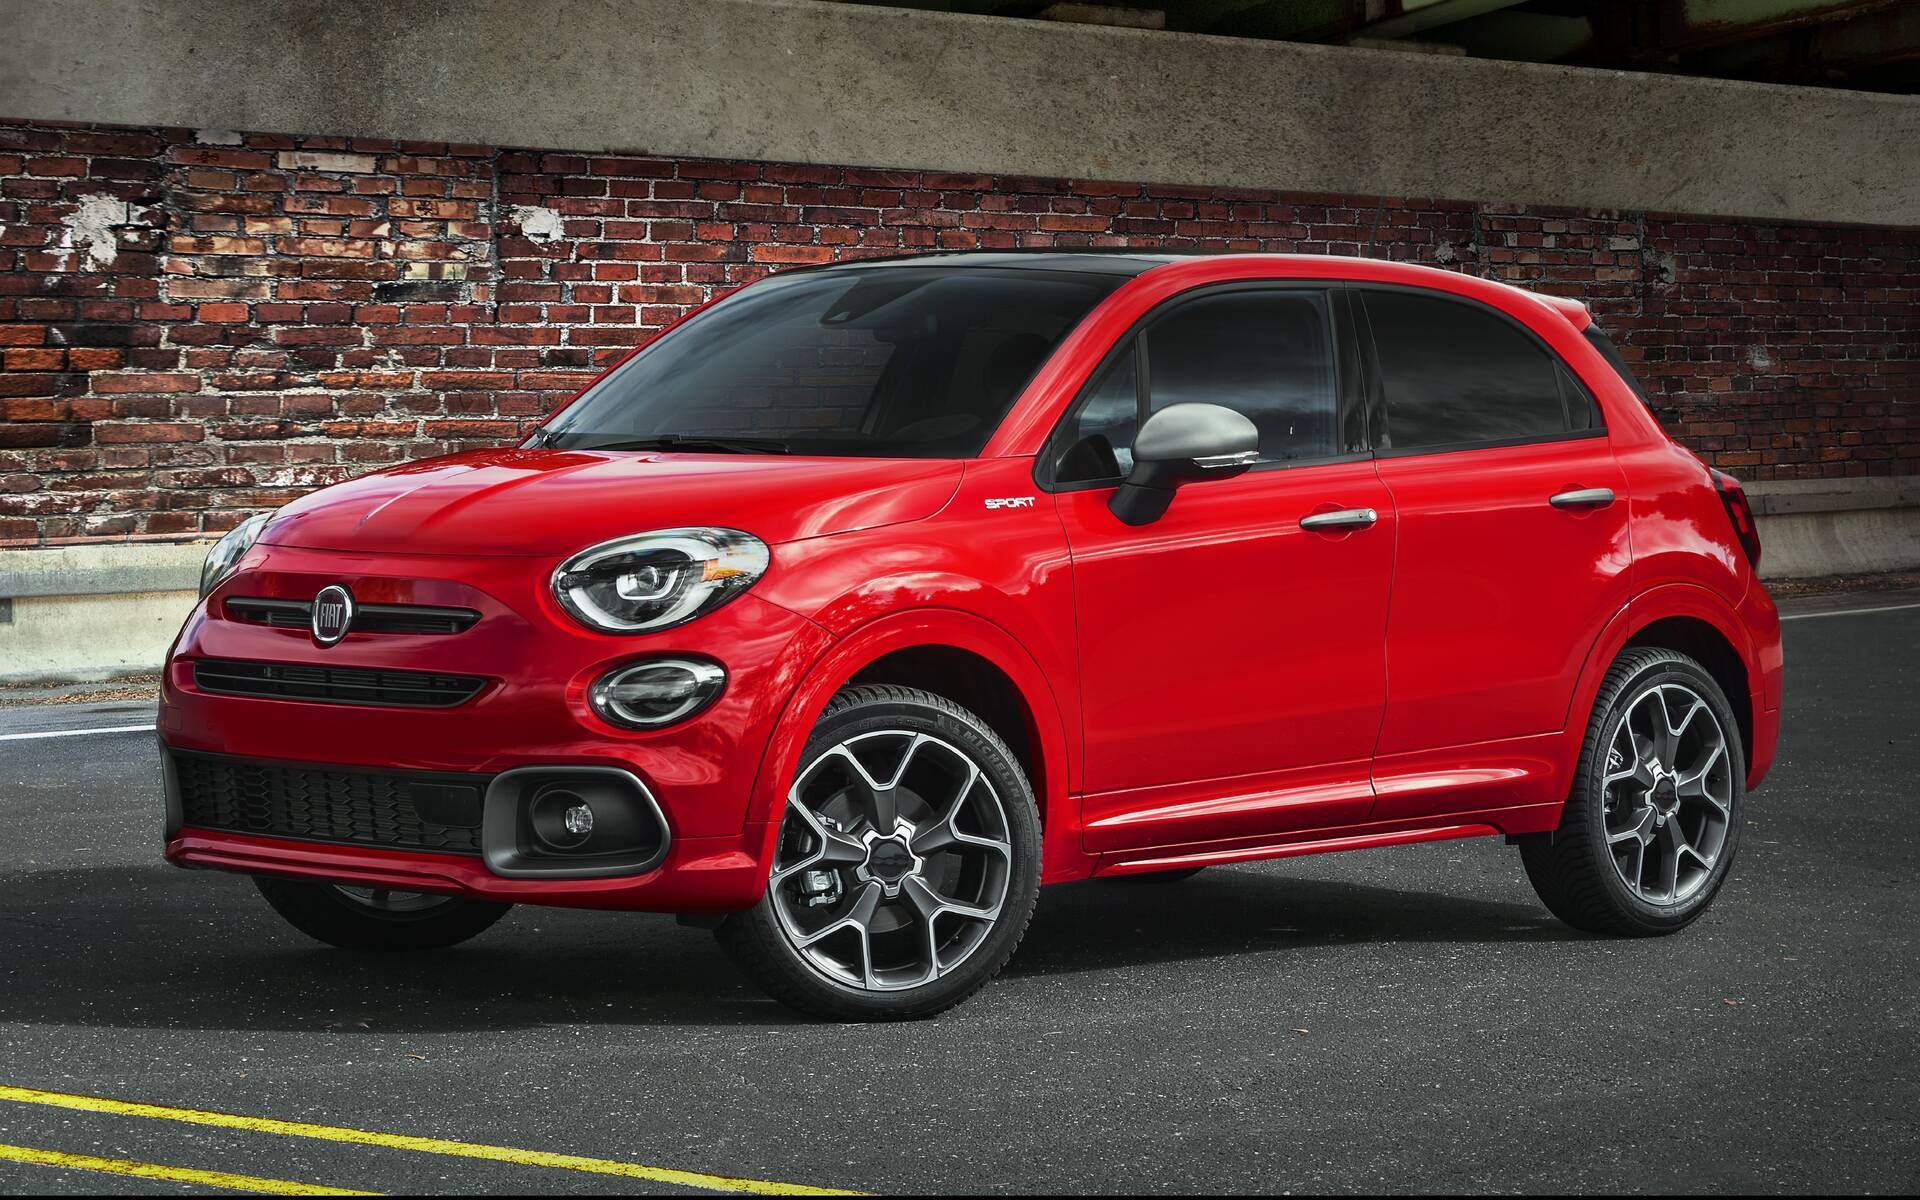 2021 Fiat 500X - News, reviews, picture galleries and videos - The Car Guide